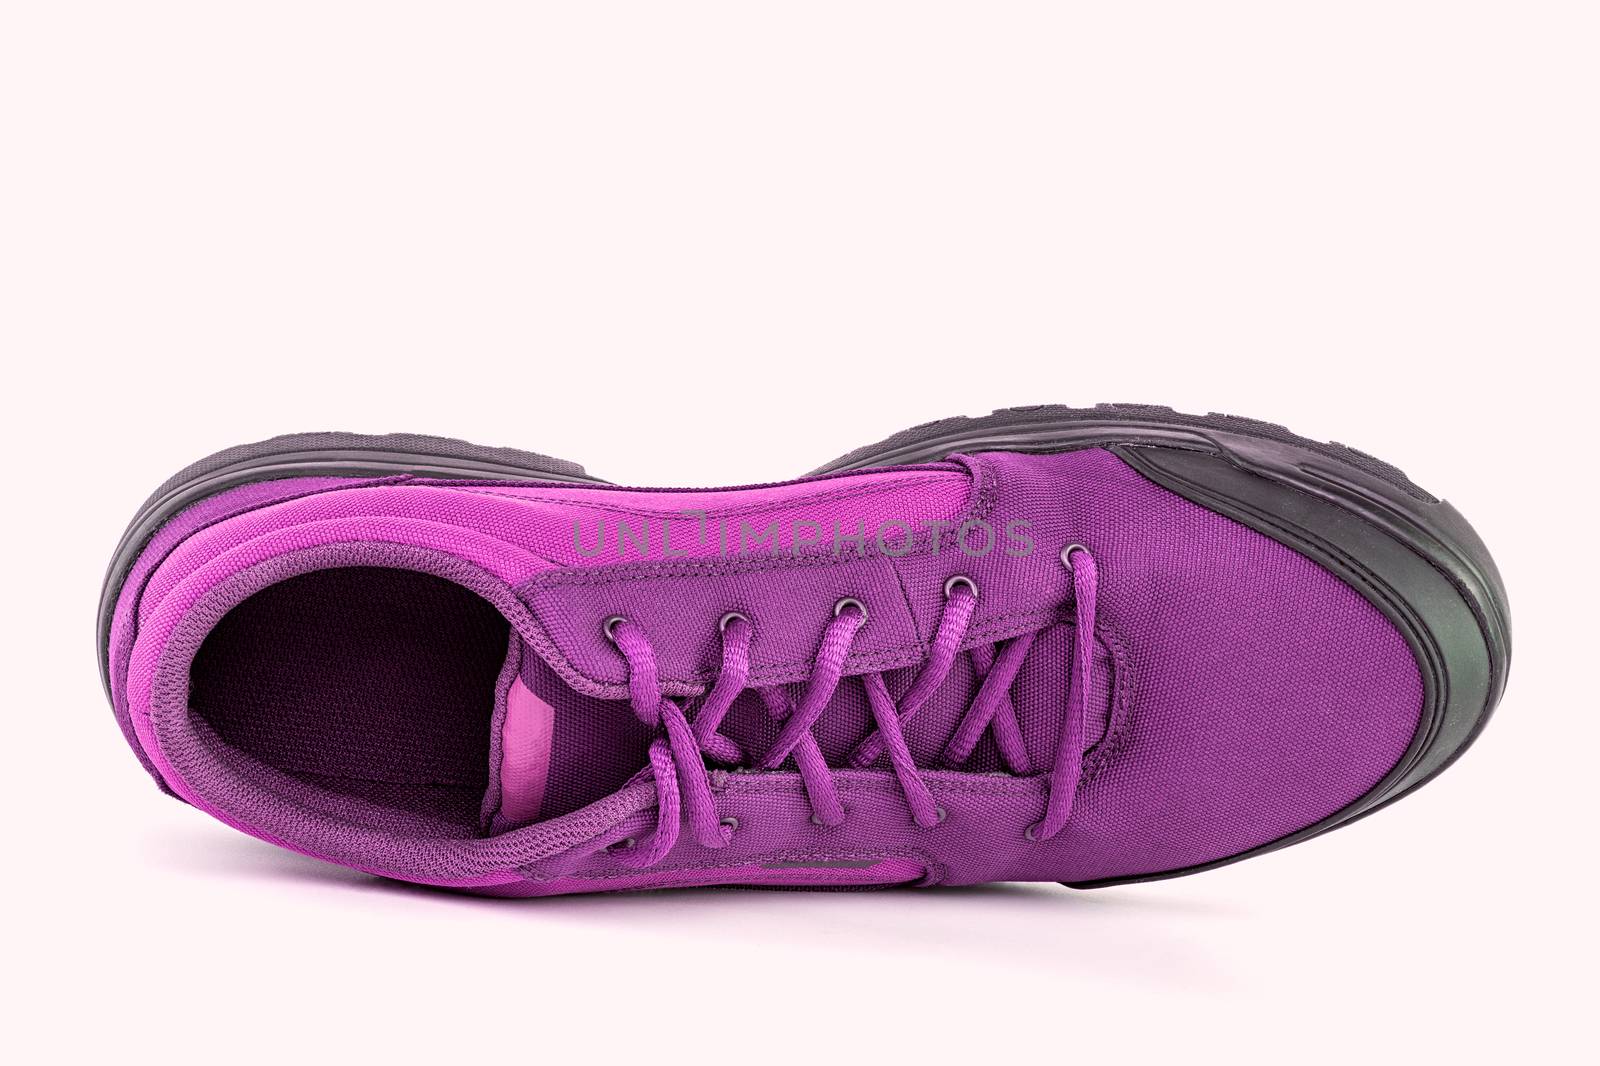 right cheap pink hiking or hunting shoe isolated on white background - view from above.